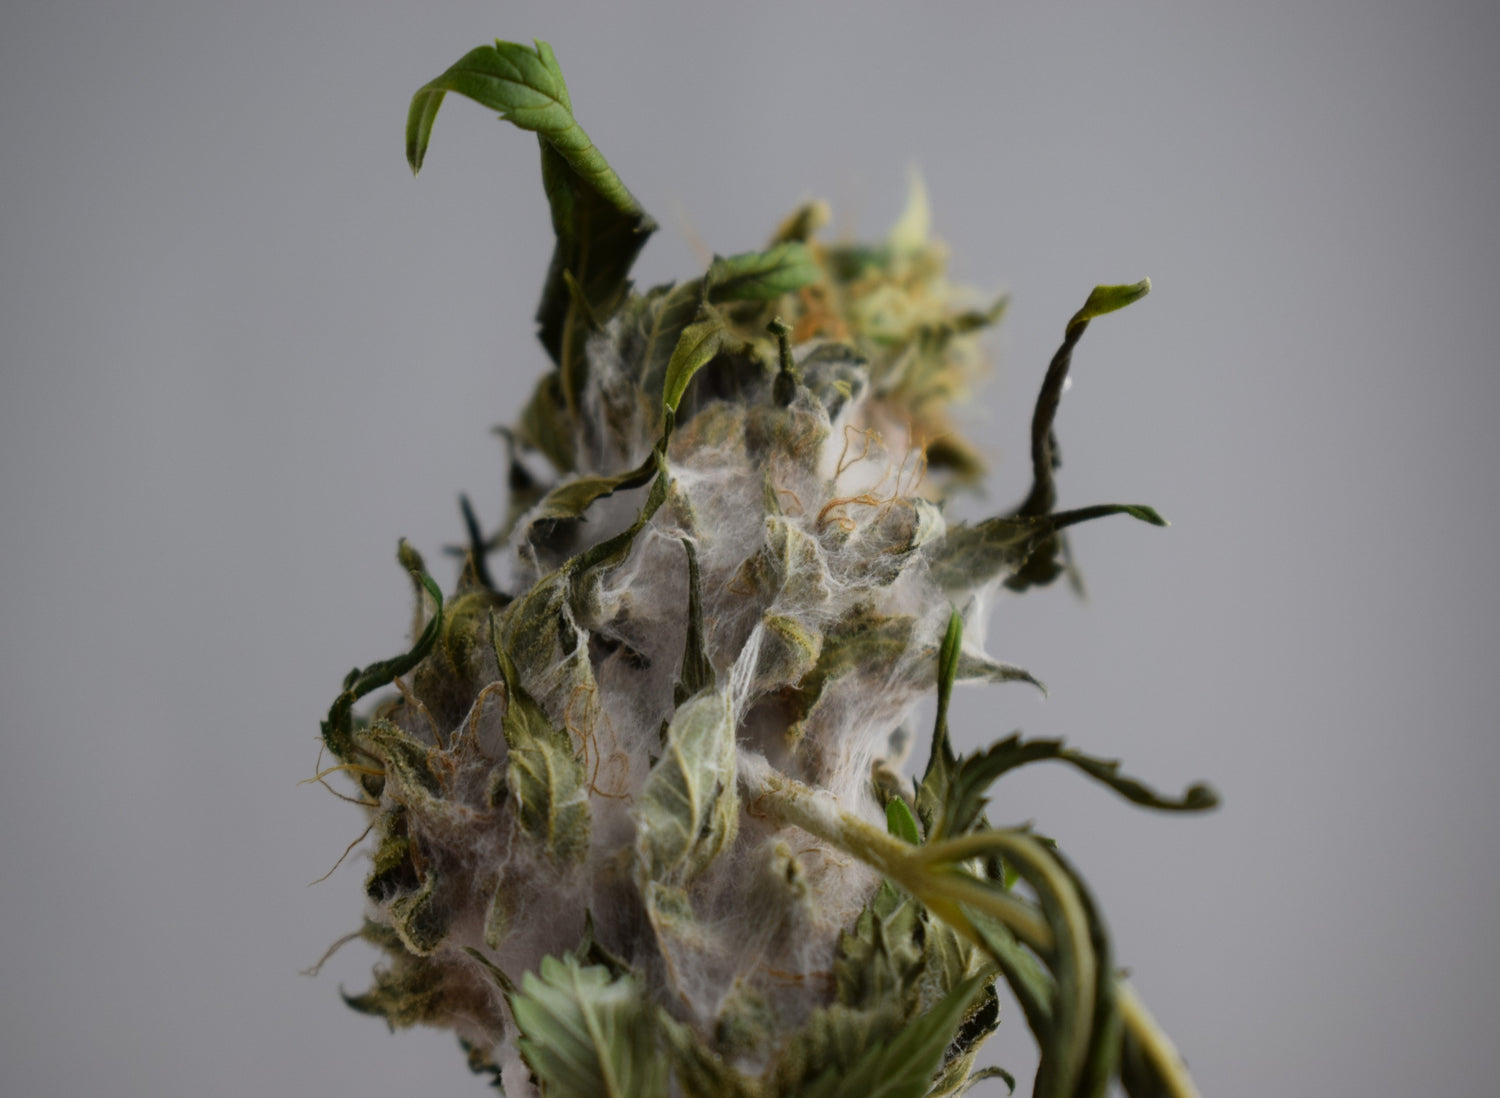 Moldy Weed: How to Identify &amp; Handle